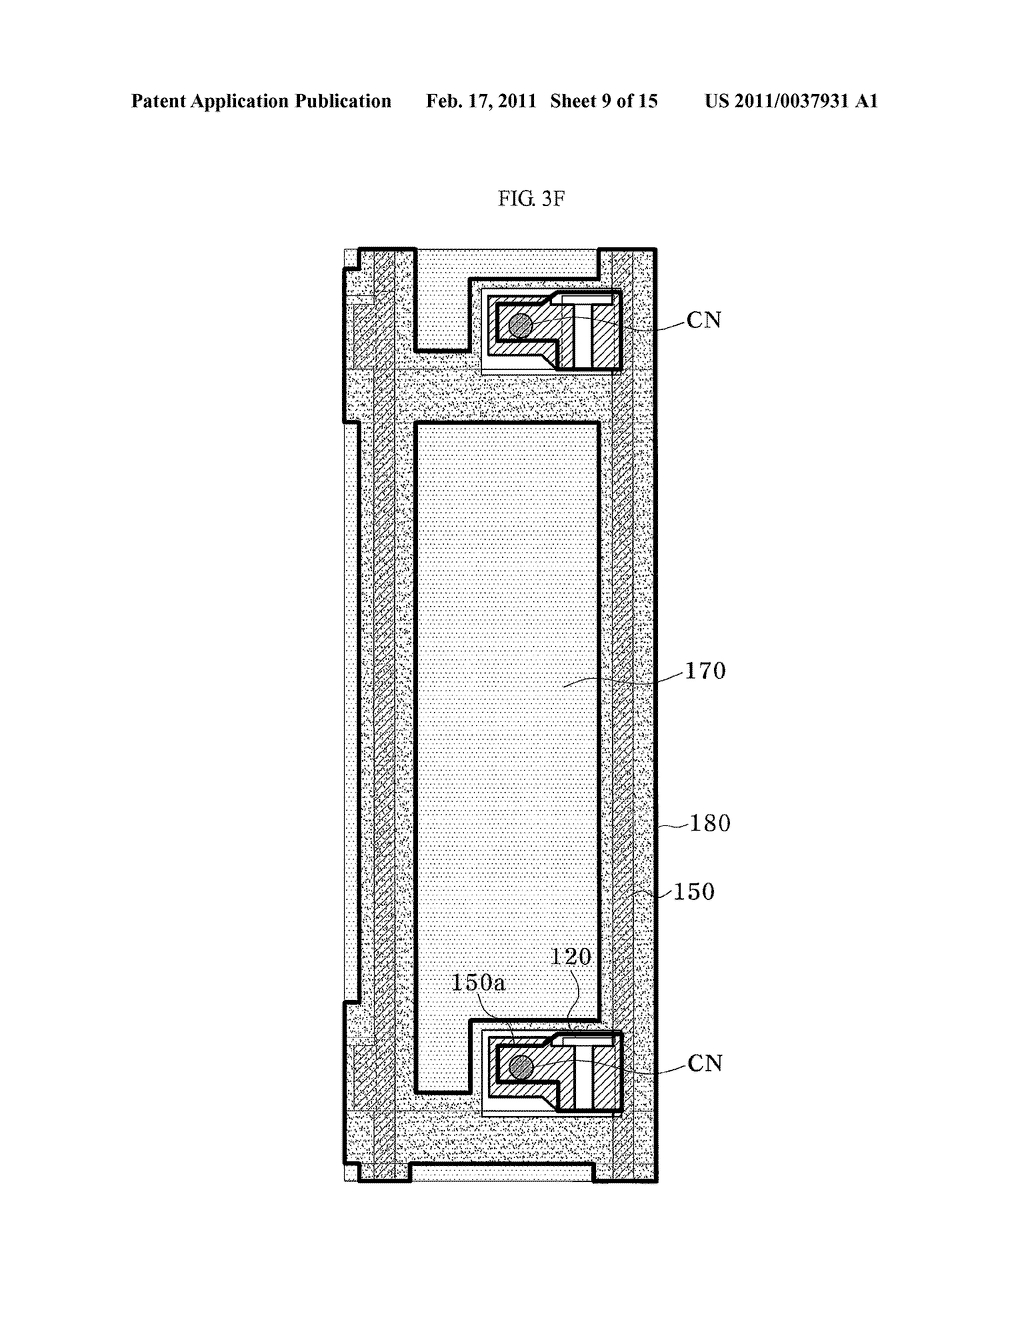 Fringe-Field-Switching-Mode Liquid Crystal Display and Method of Manufacturing the Same - diagram, schematic, and image 10